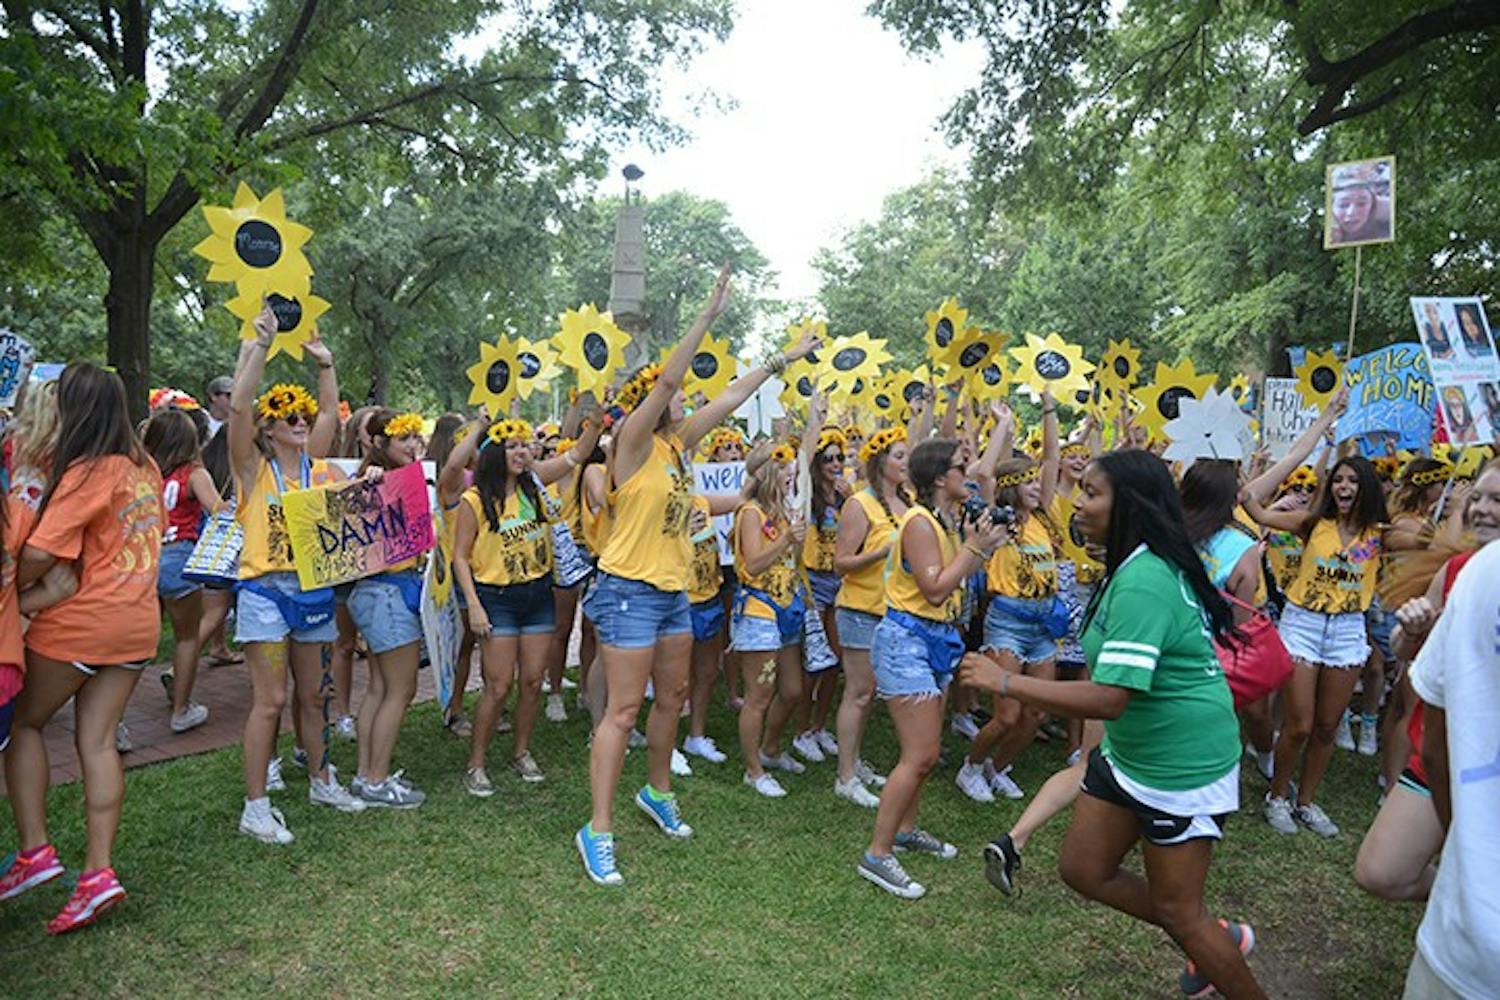 After two weeks of recruitment, hundreds of women received their bids and dashed to their newfound sisterhoods Sunday during the annual Bid Day festivities.